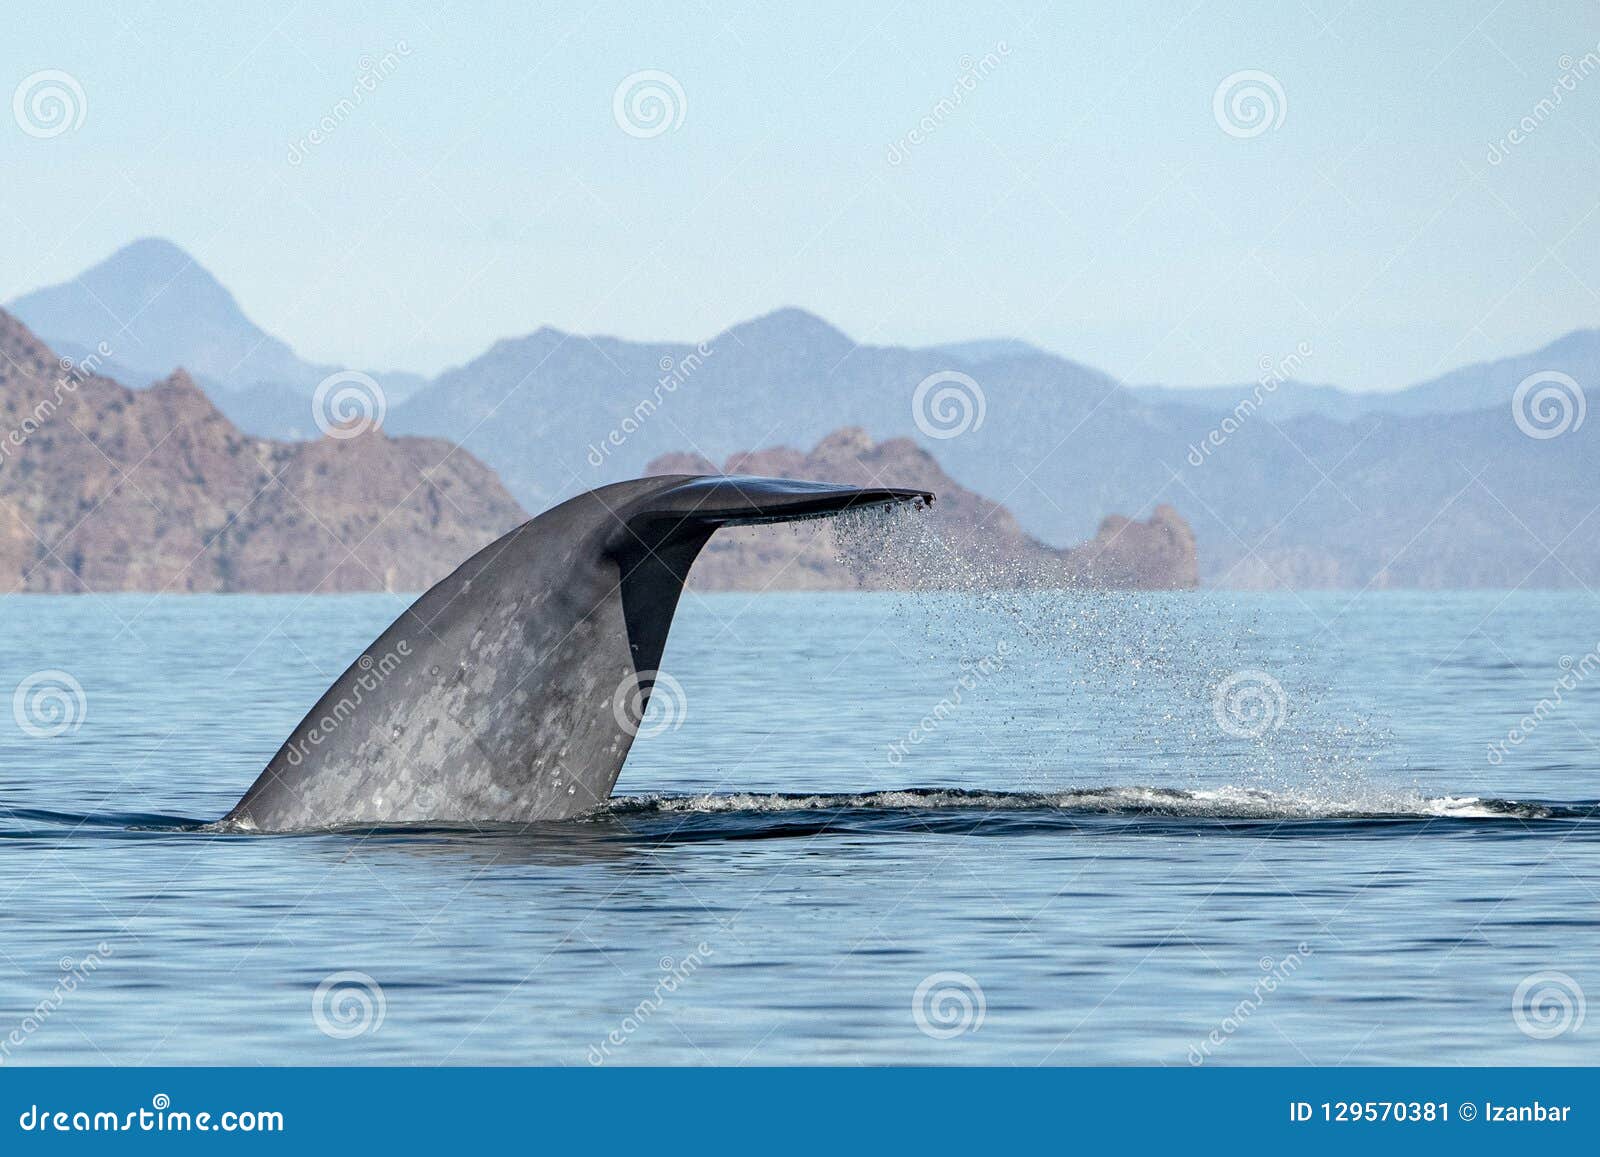 Blue Whale the Biggest Animal in the World Tail Detail Stock Image - Image  of mammal, nature: 129570381